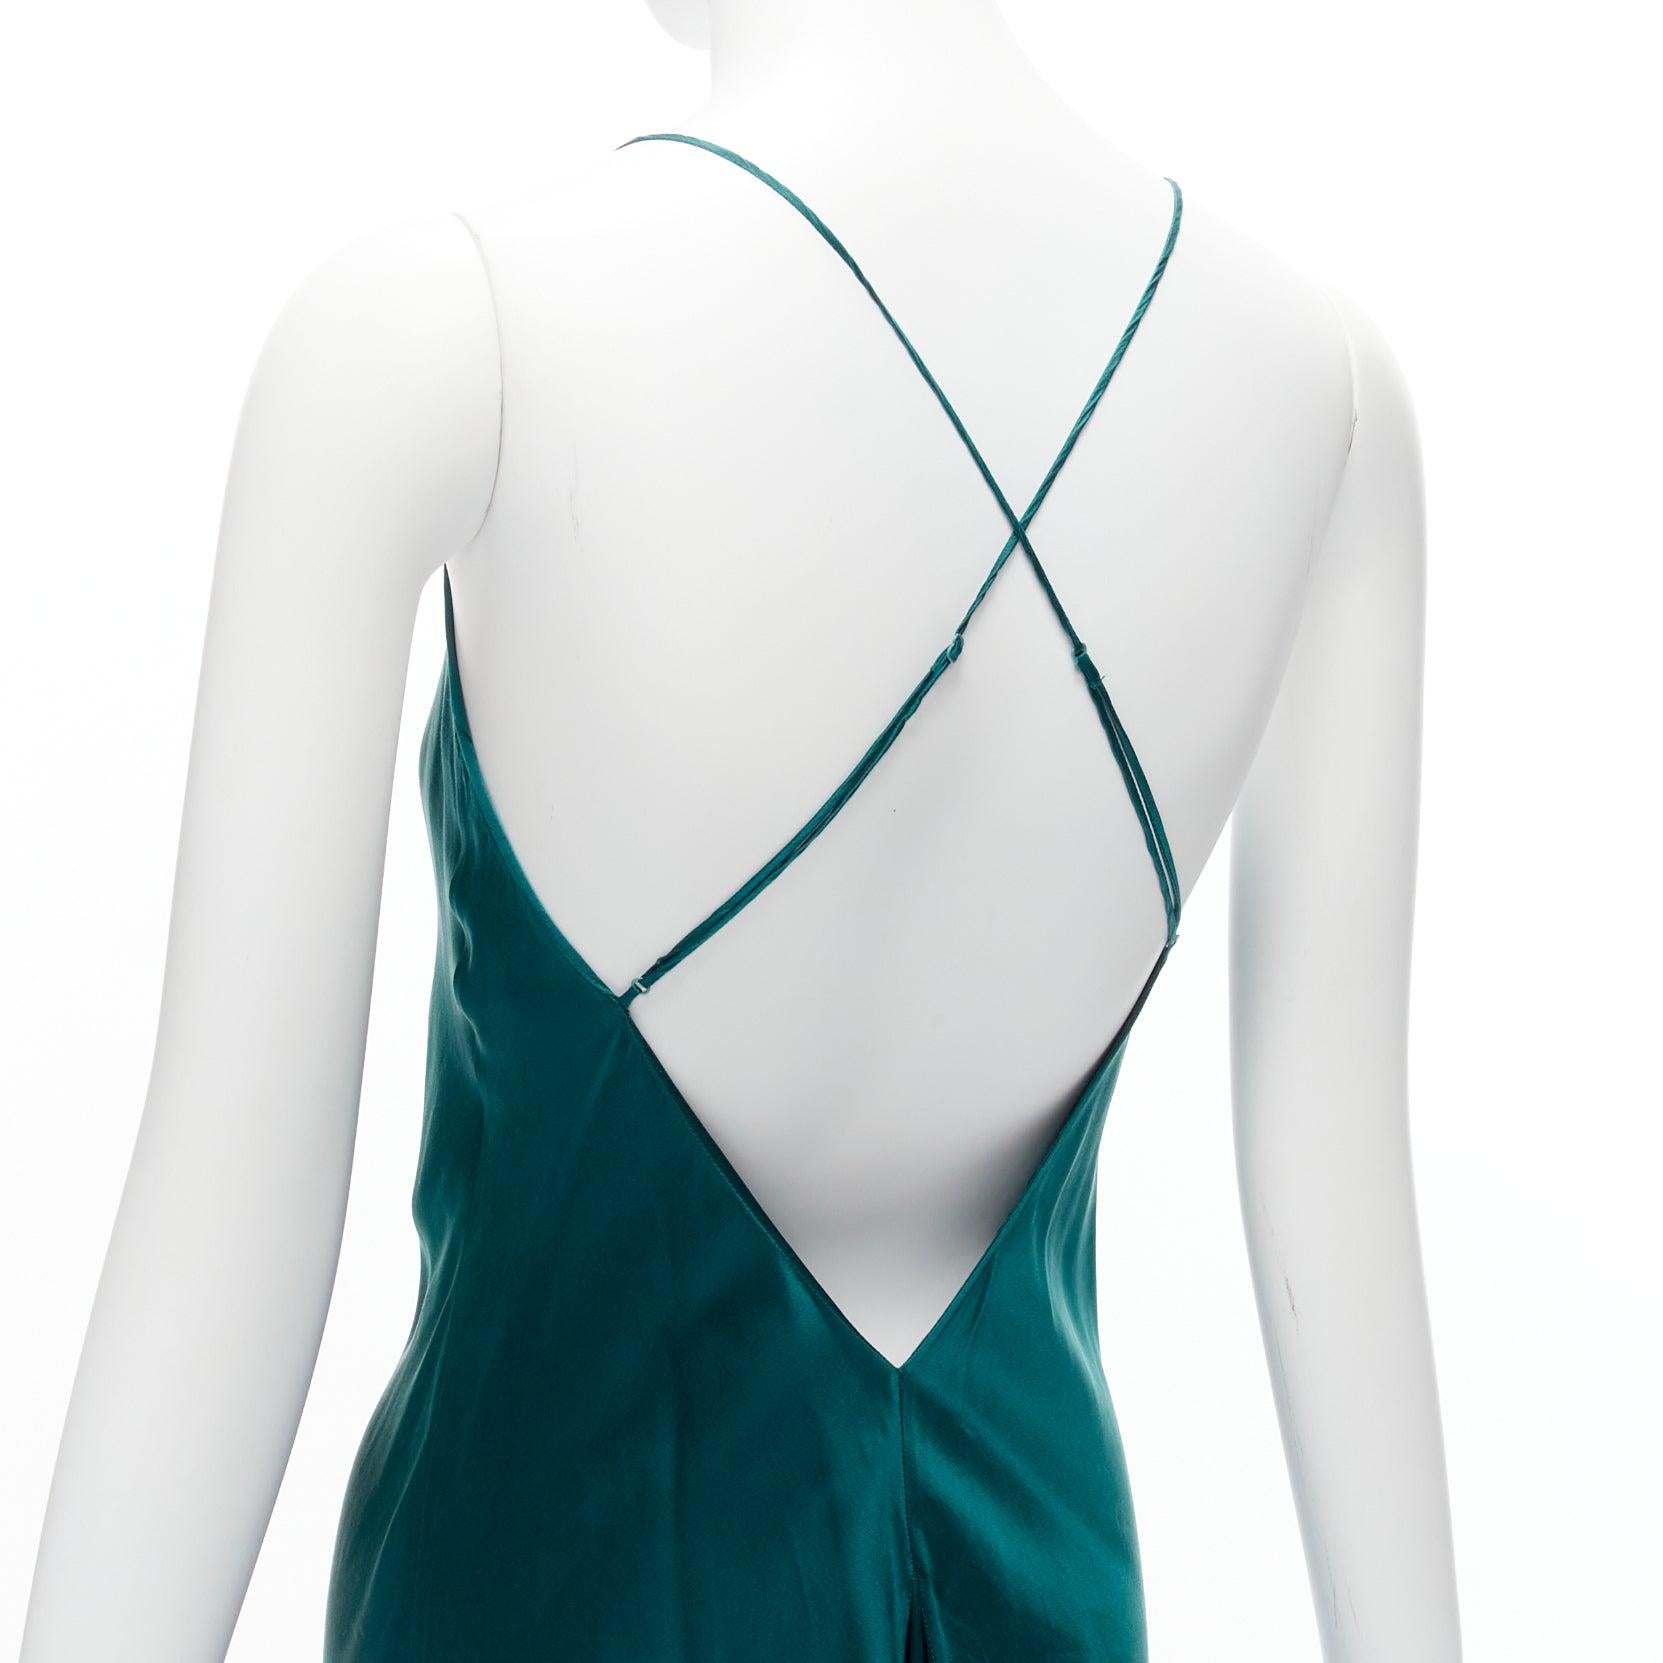 OLIVIA VON HALLE 100% silk turquoise green satin strappy slip dress Size 1 XS
Reference: LNKO/A02183
Brand: Olivia Von Halle
Material: Silk
Color: Green
Pattern: Solid
Closure: Slip On
Lining: Green Silk
Extra Details: Buckles at straps